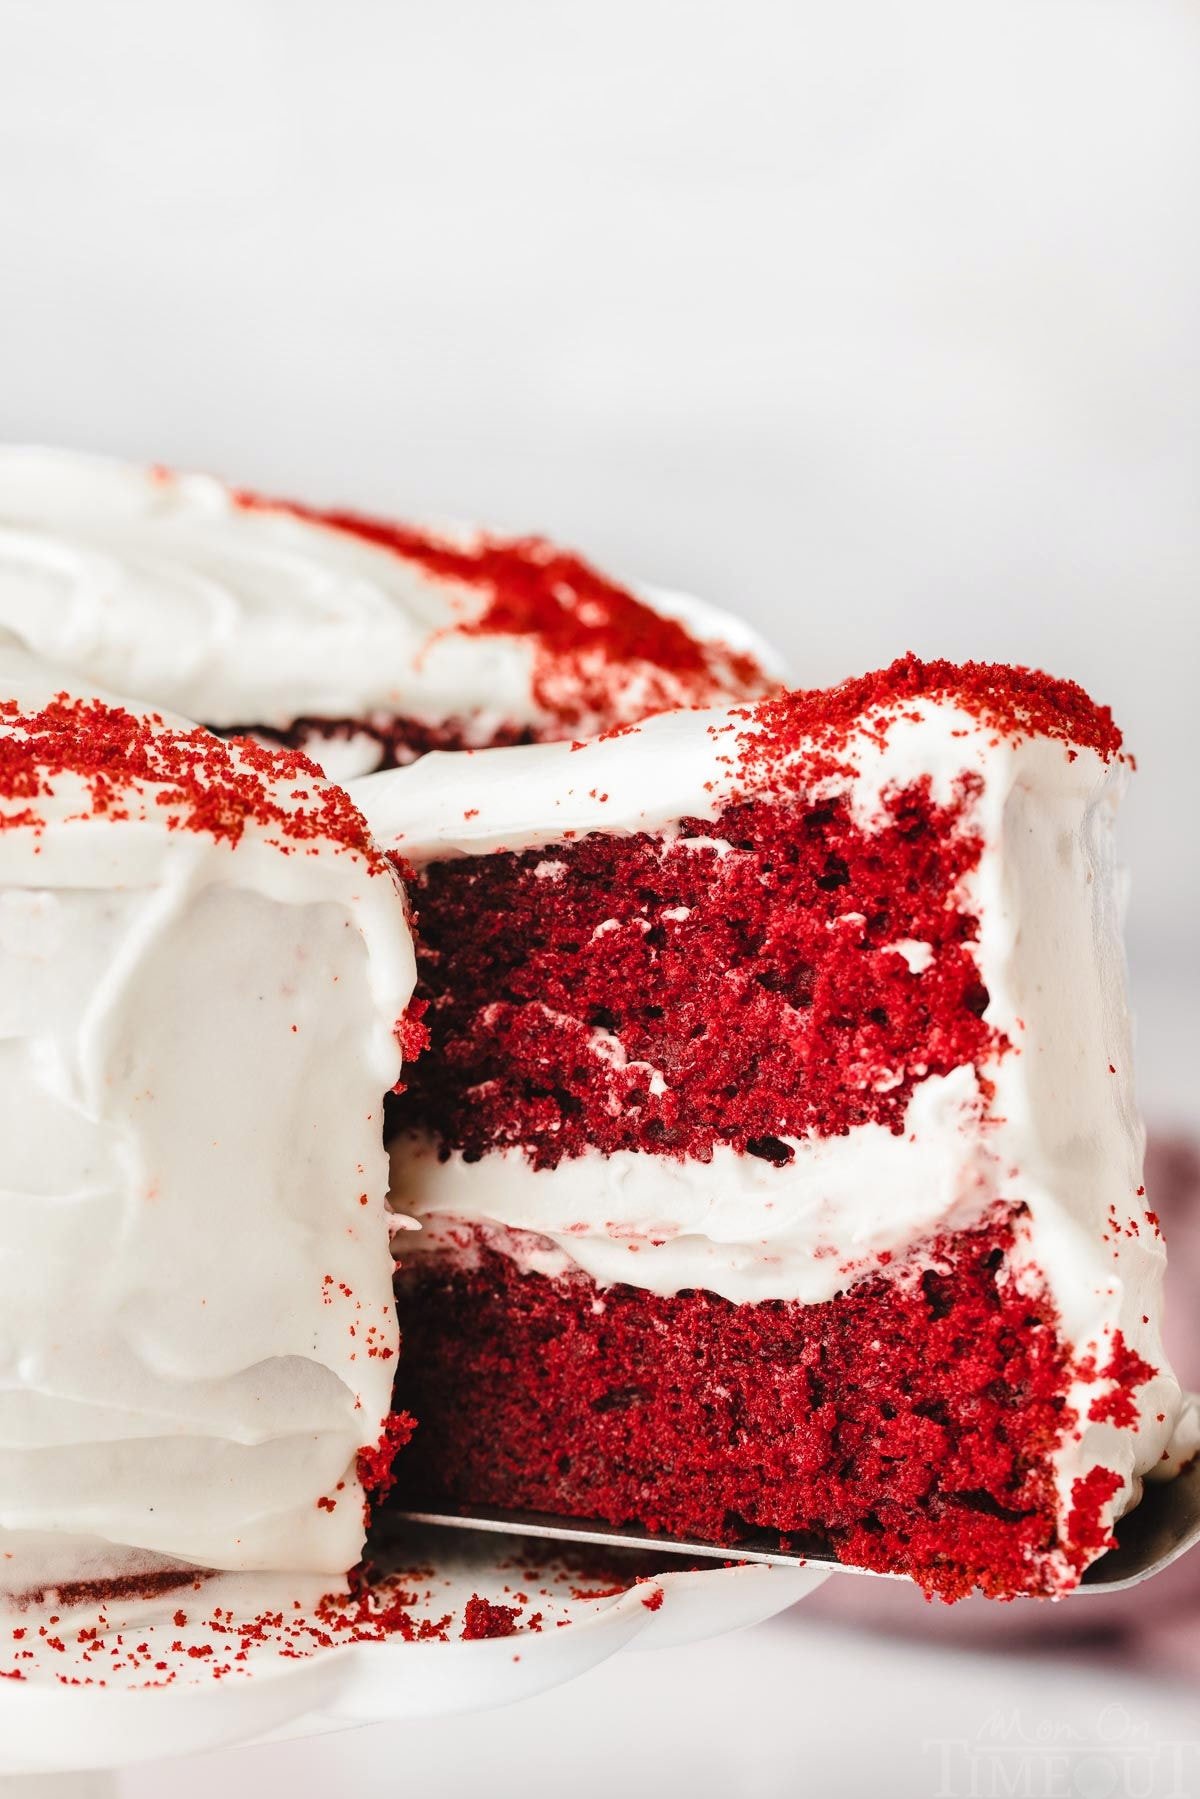 slice of red velvet cake being pulled out from the rest of the whole cake on a white cake stand.